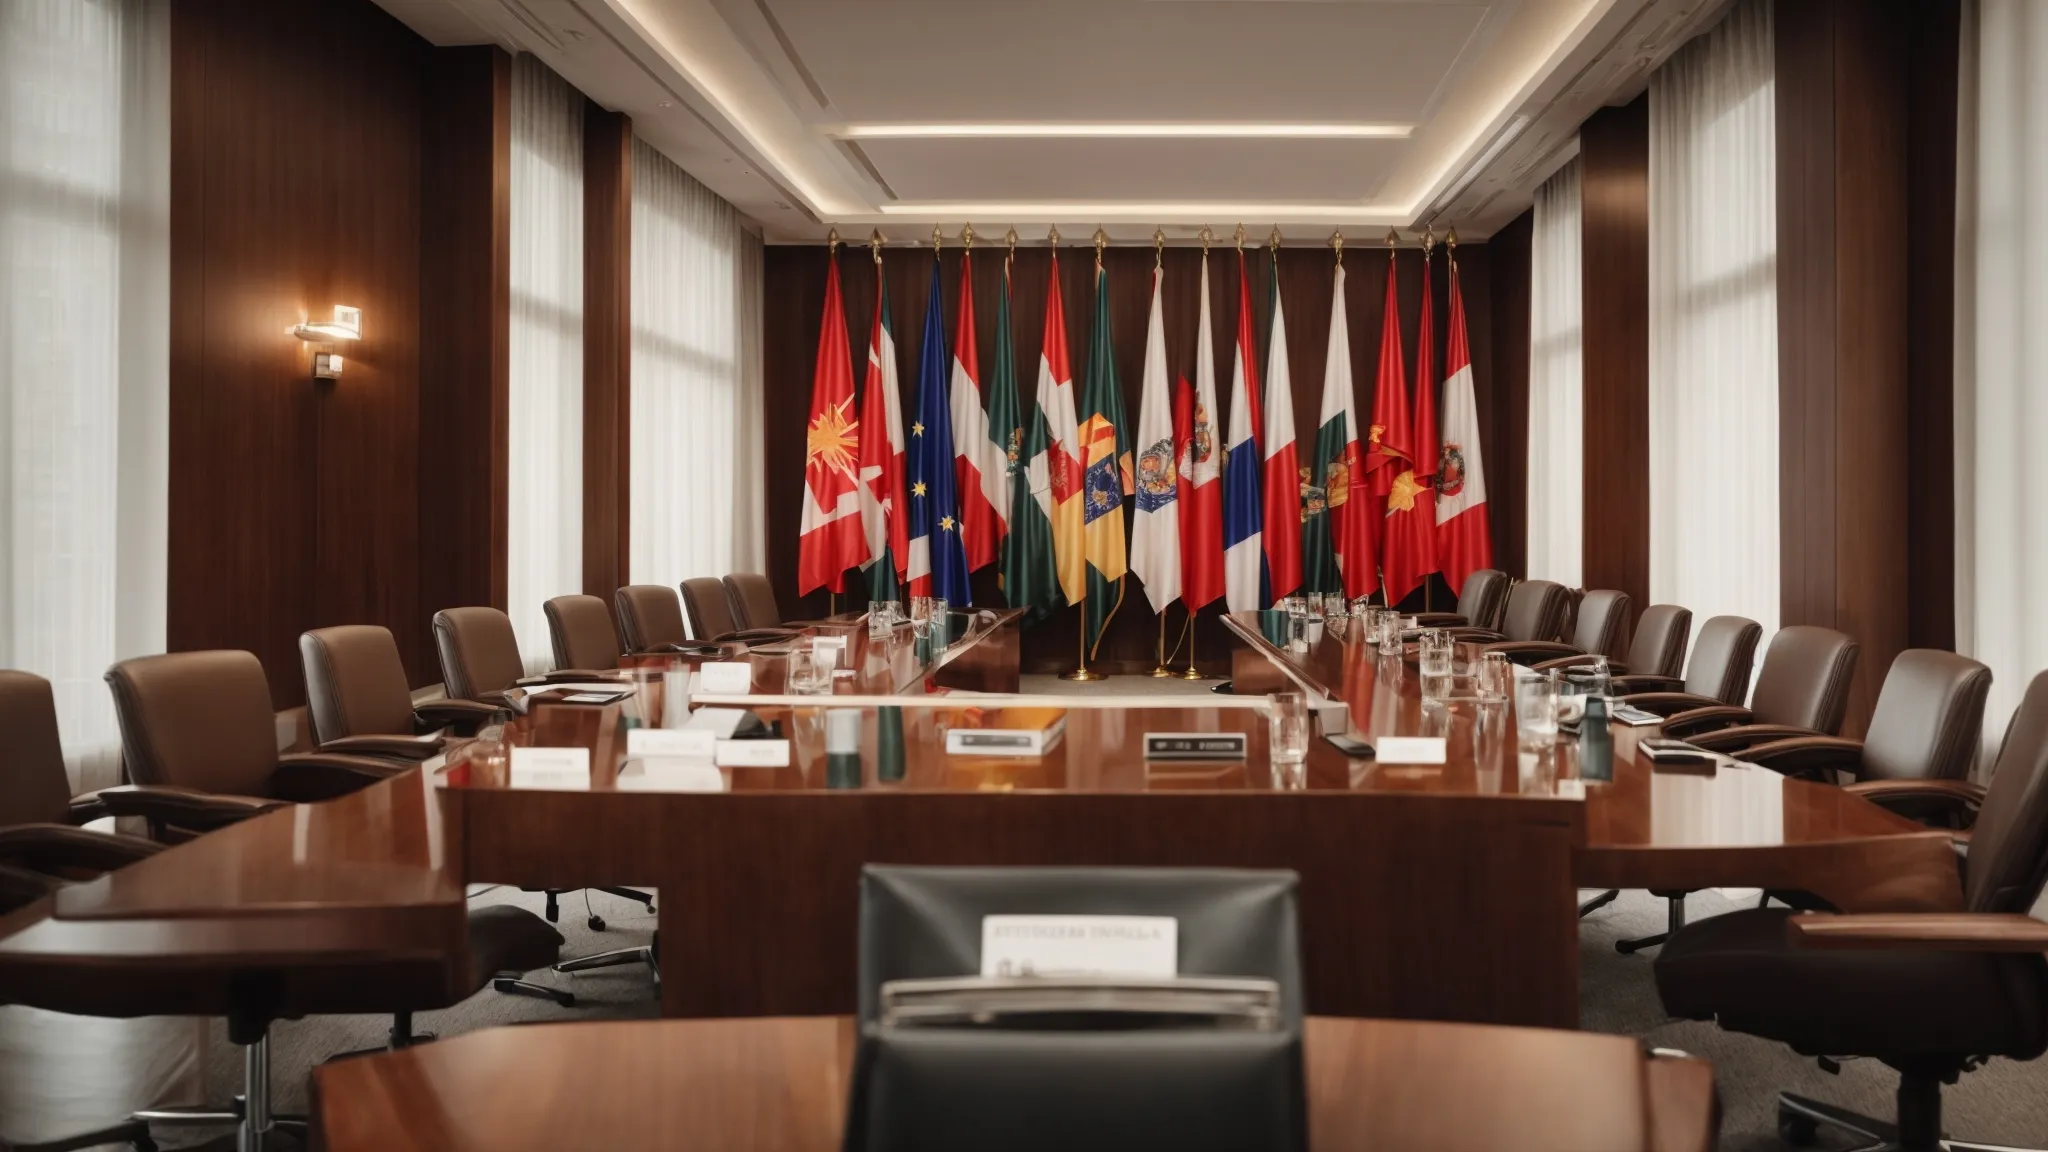 a conference room with nation flags signals diplomats discussing the future of international investment arbitration or ISDS Reform. 